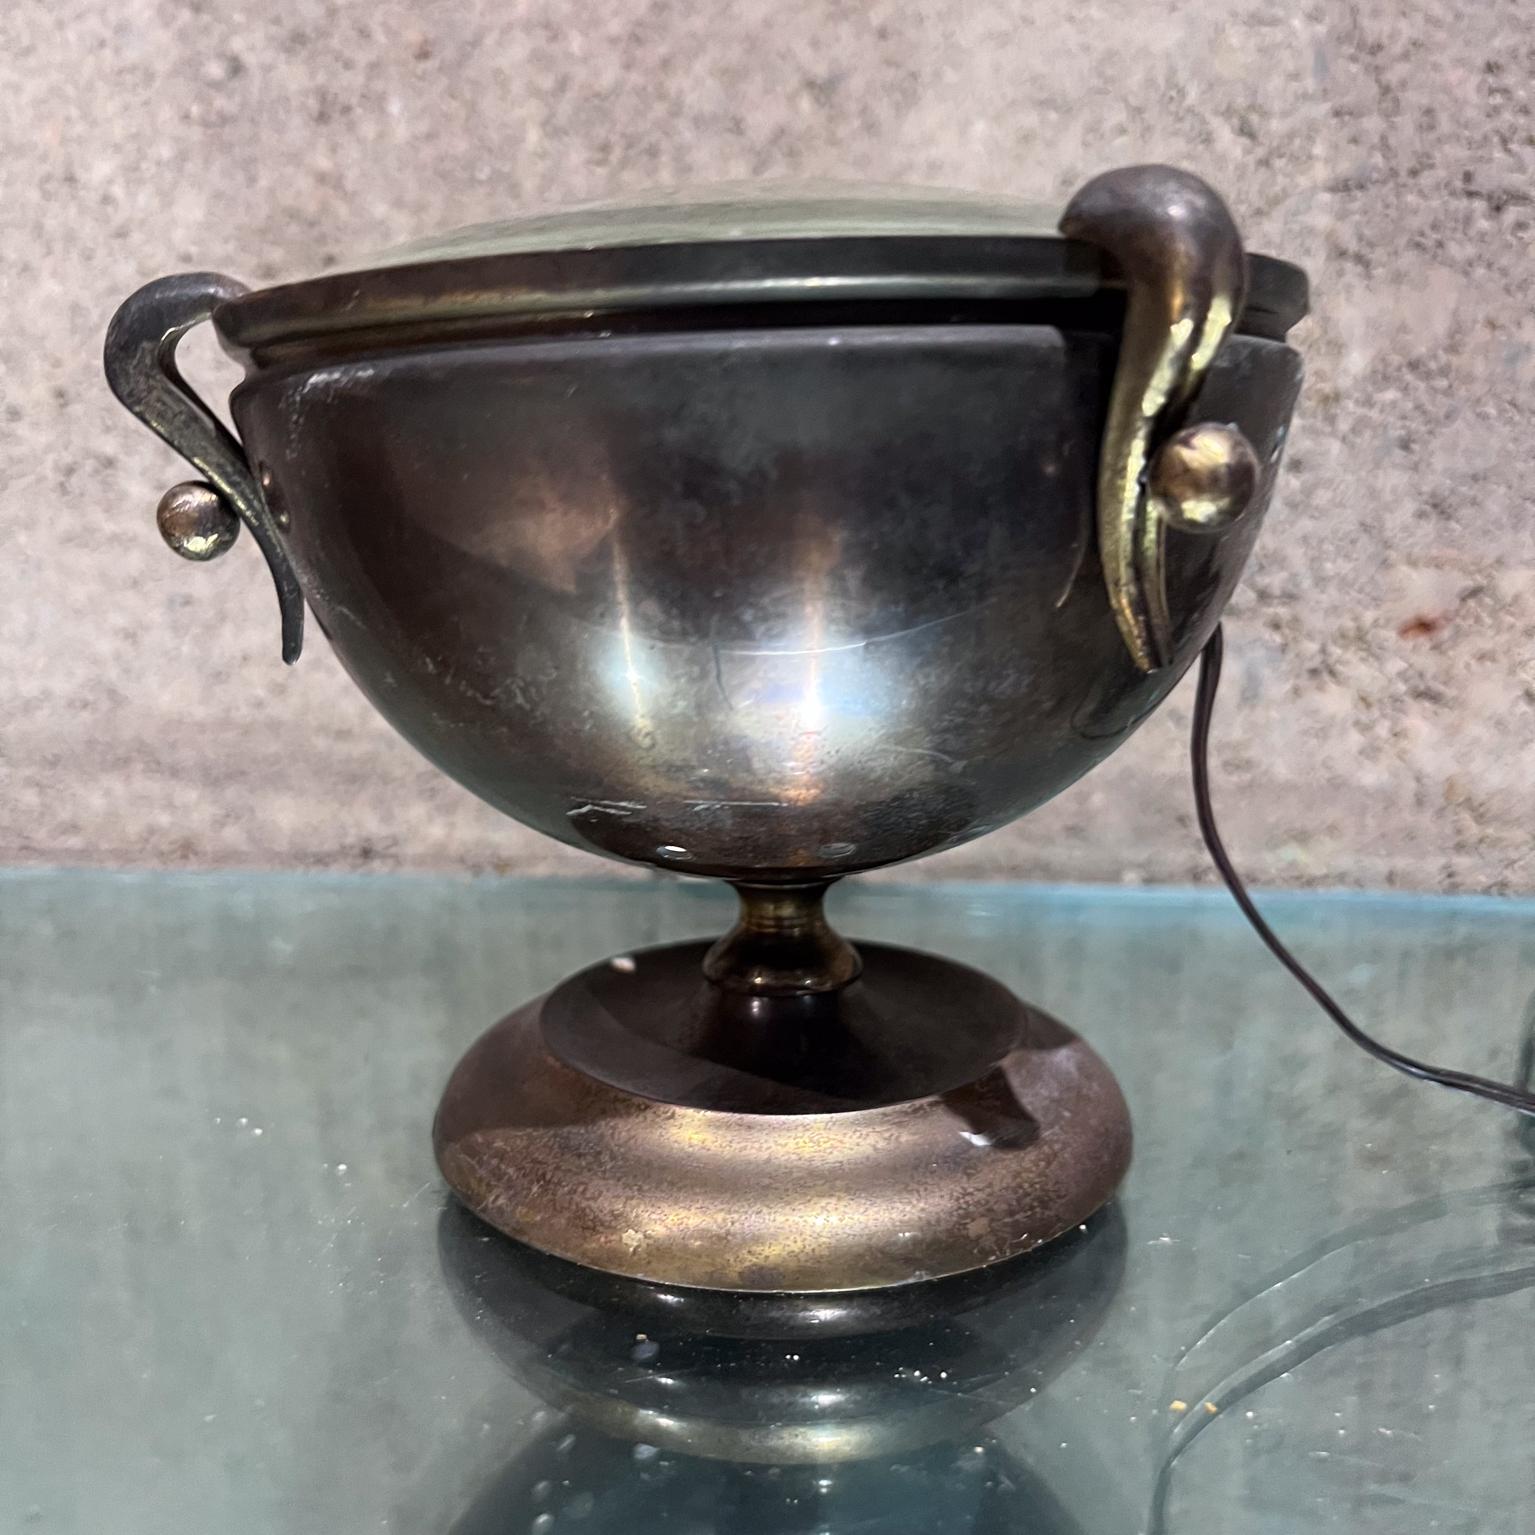 from AMBIANIC
1950s Sculptural Brass Urn Table Lamp from Italy
attributed Fontana Arte and Gio Ponti
unmarked.
glass magnifying top
4.25 h x 6 diameter
Original Unrestored Preowned Vintage Condition. Rewired.
Please expect vintage wear with patina